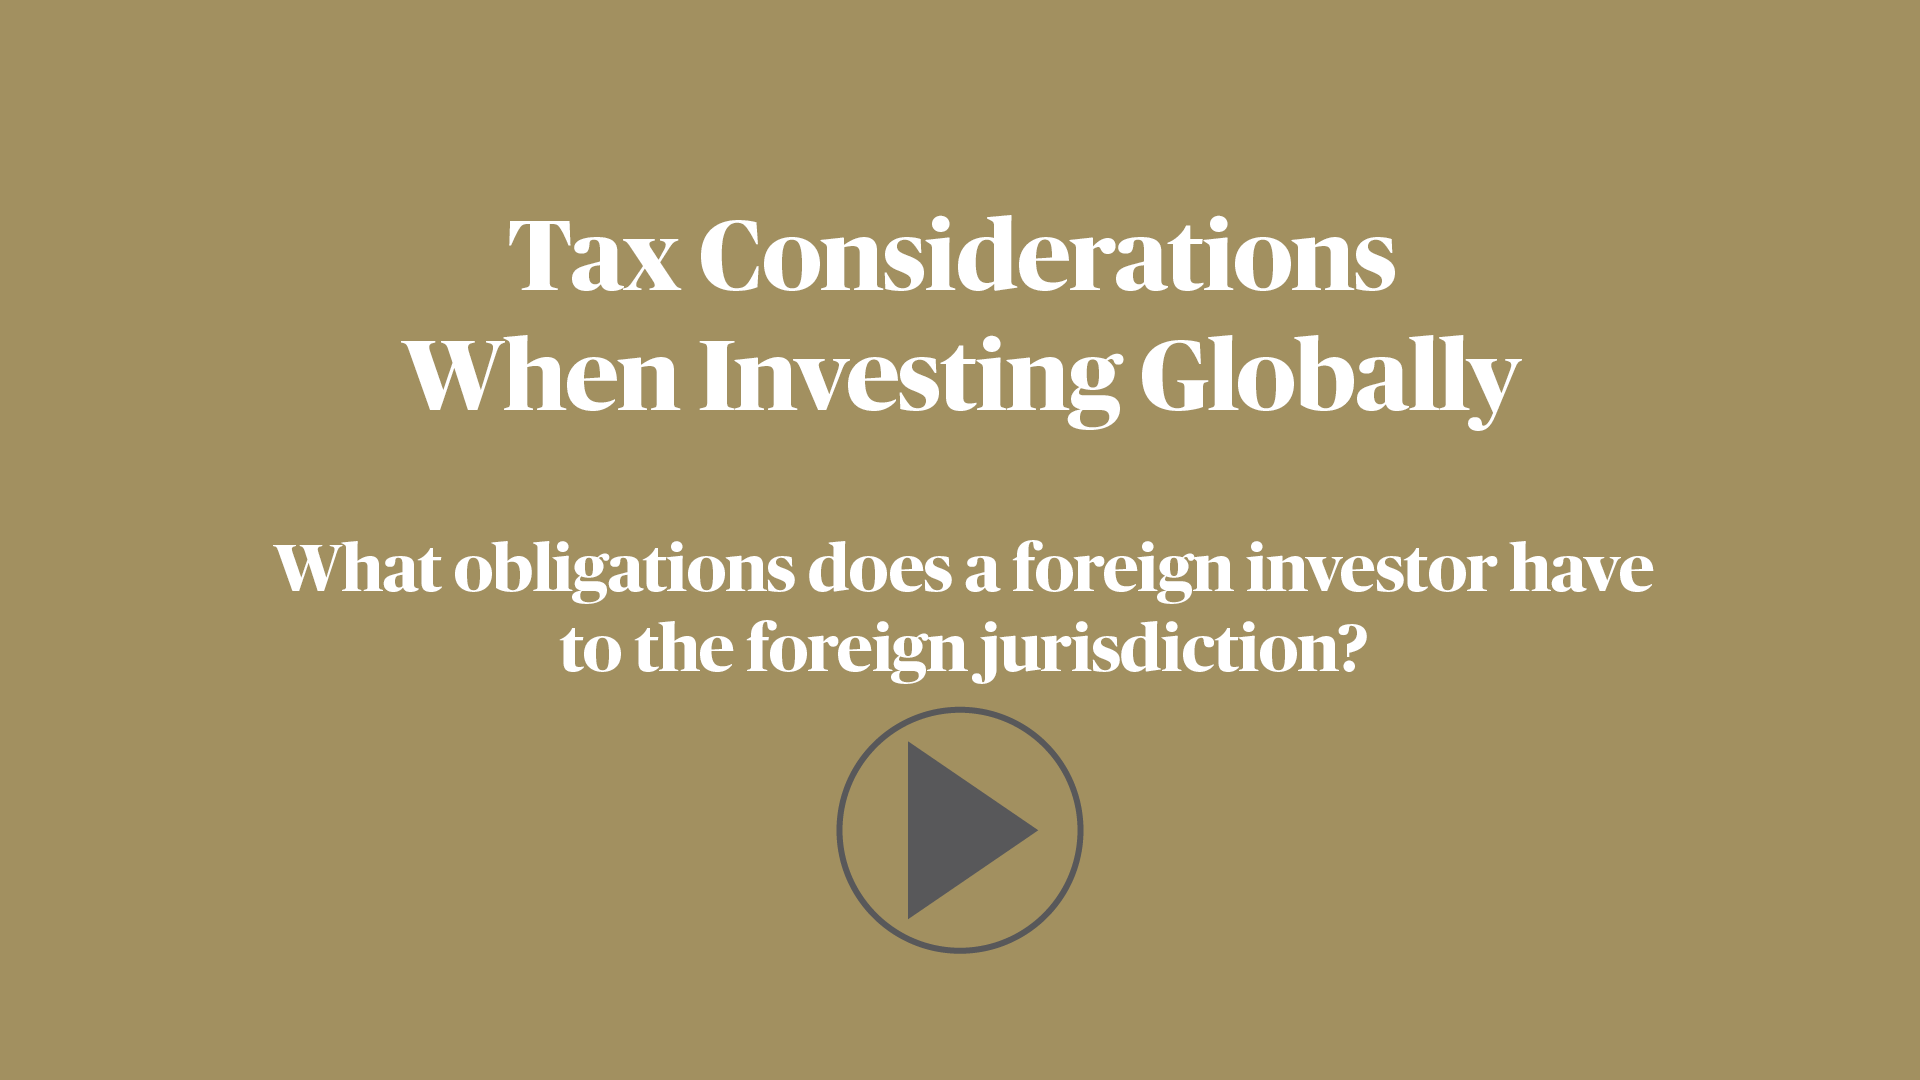 What obligations does a foreign investor have to the foreign jurisdiction?